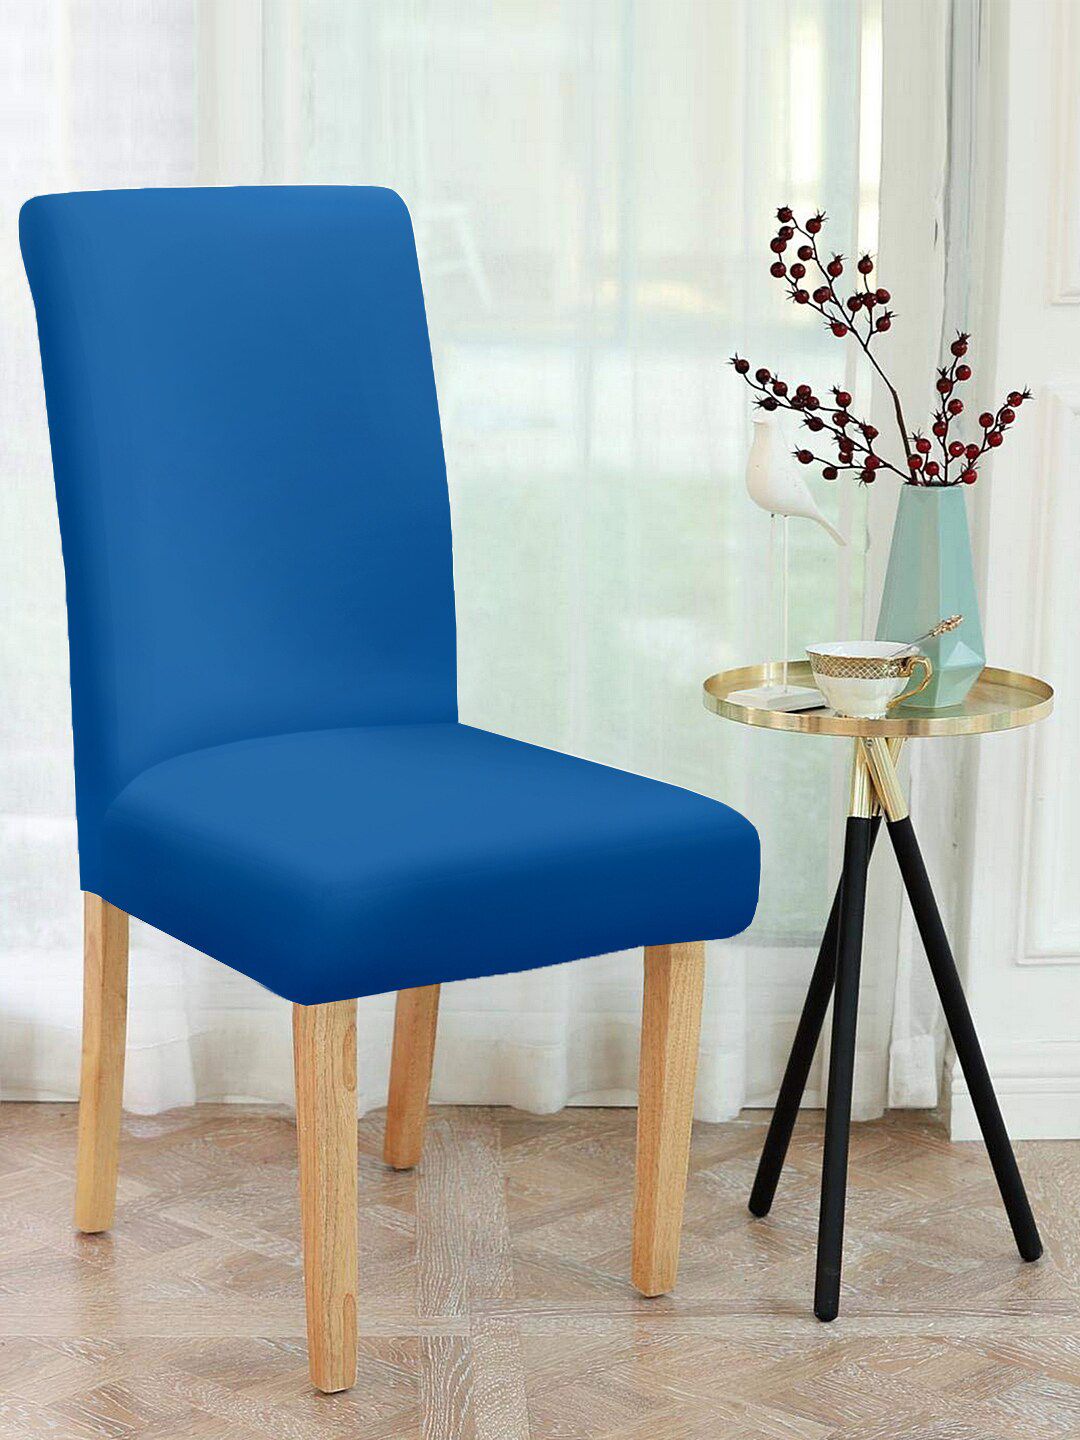 Cortina Set Of 8 Blue Solid Chair Covers Price in India